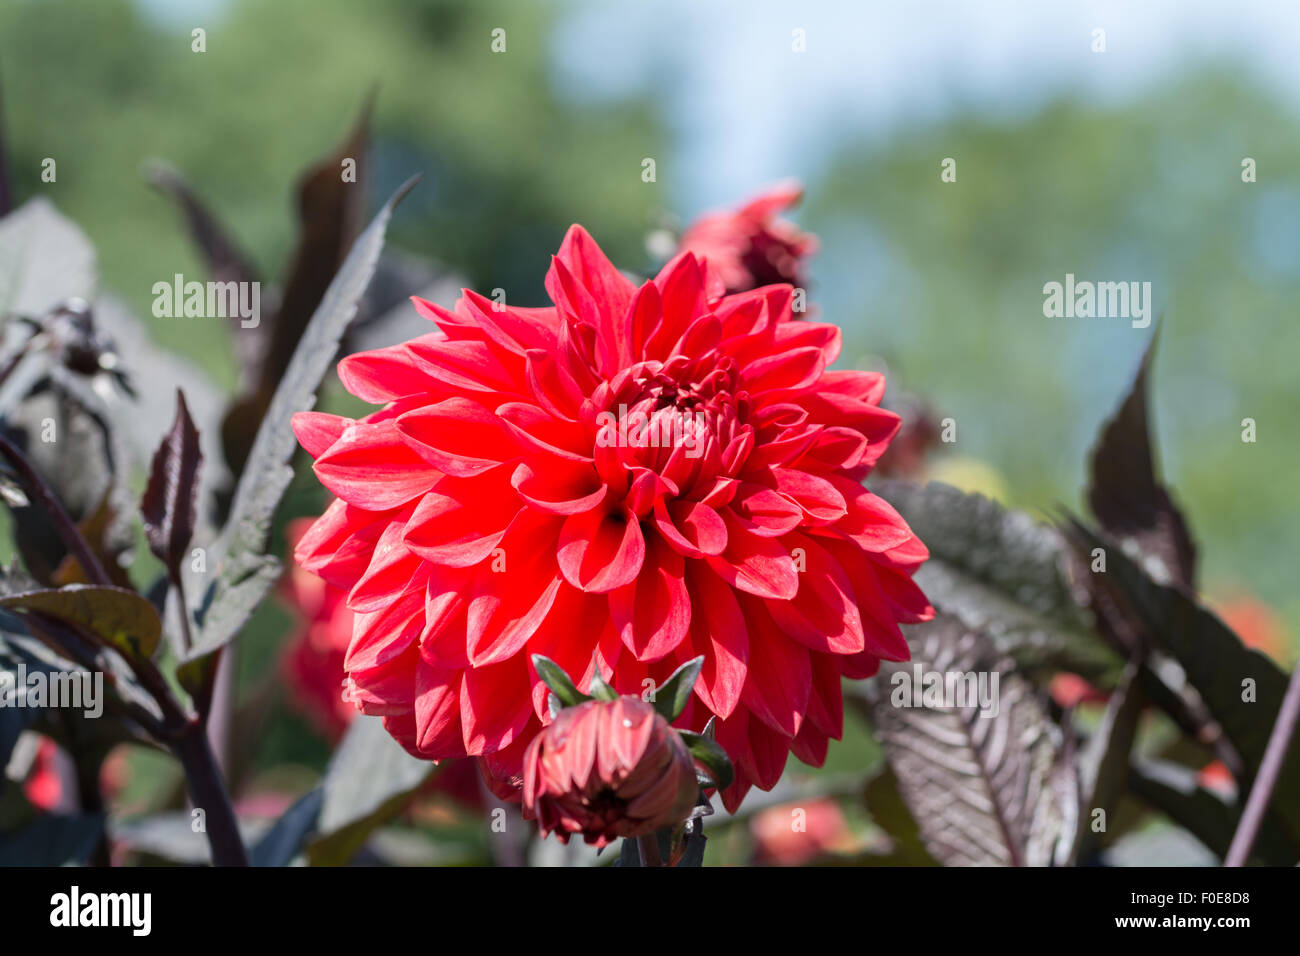 Dahlia Twyning's Black Cherry Banque D'Images